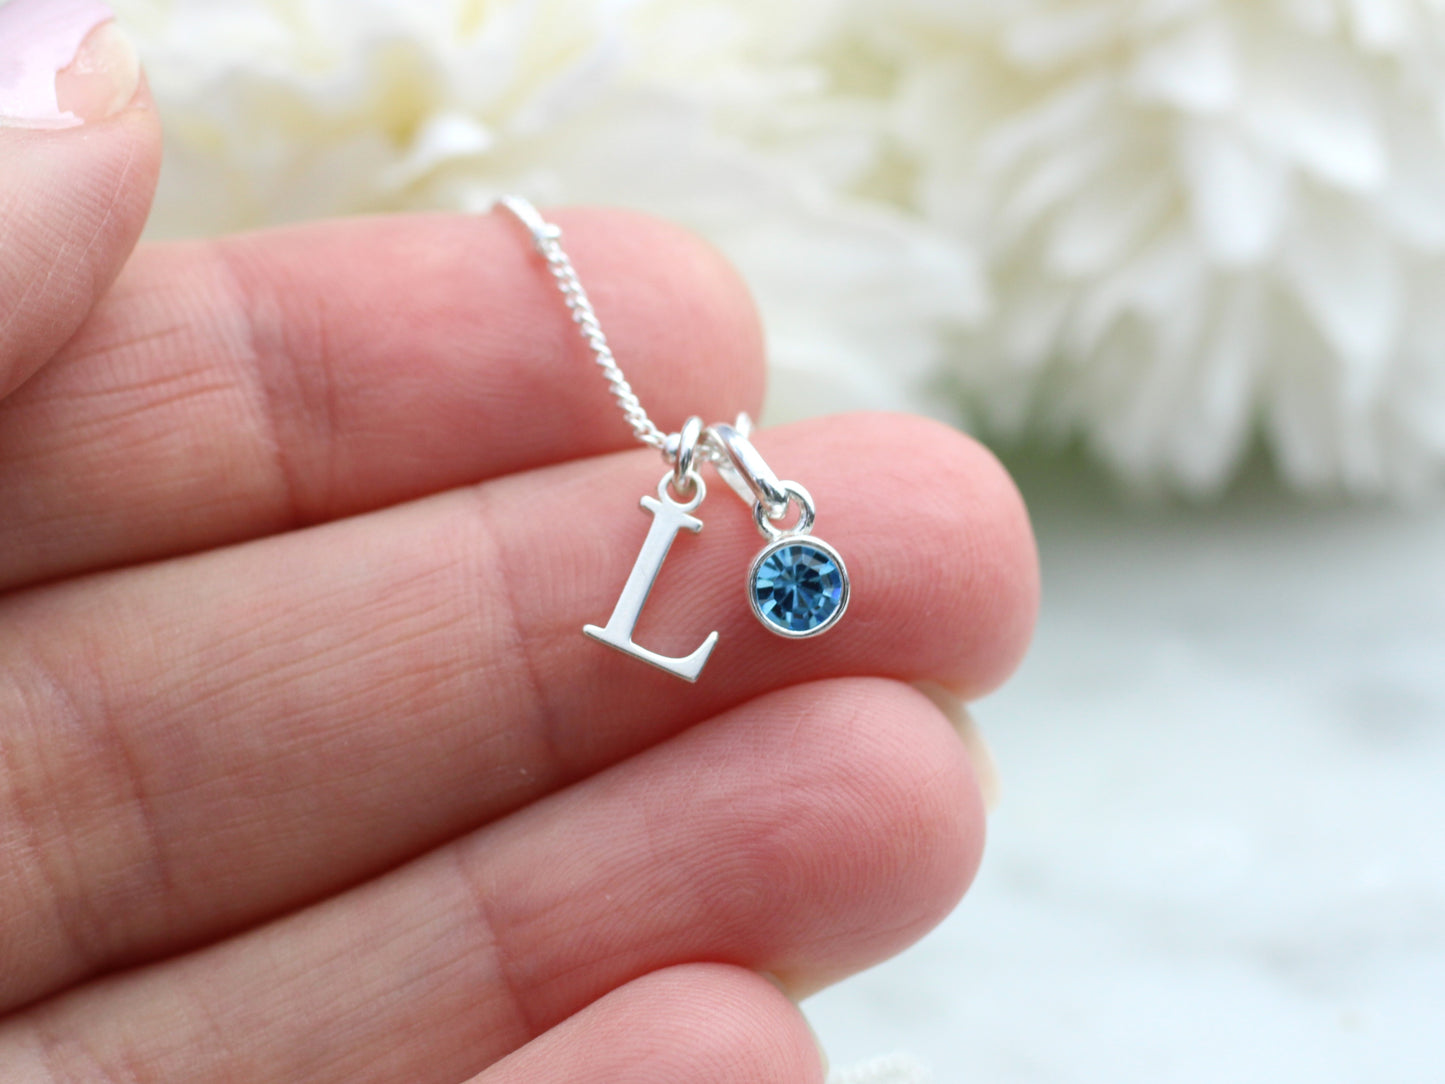 Initial and birthstone necklace.